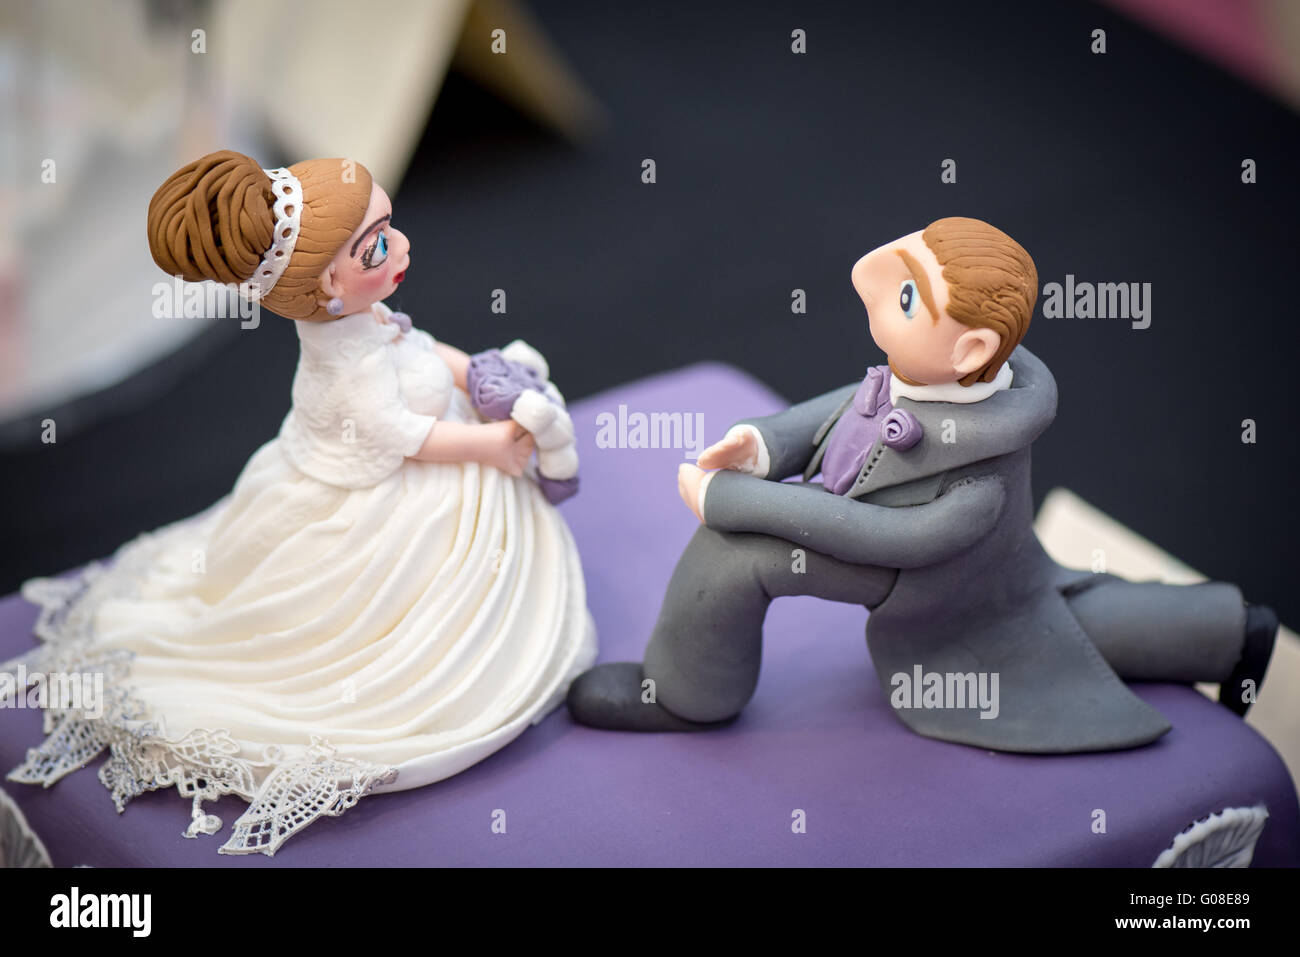 Bride Groom wedding proposal married couple at Cake International – The Sugarcraft, Cake Decorating and Baking Show in London Stock Photo